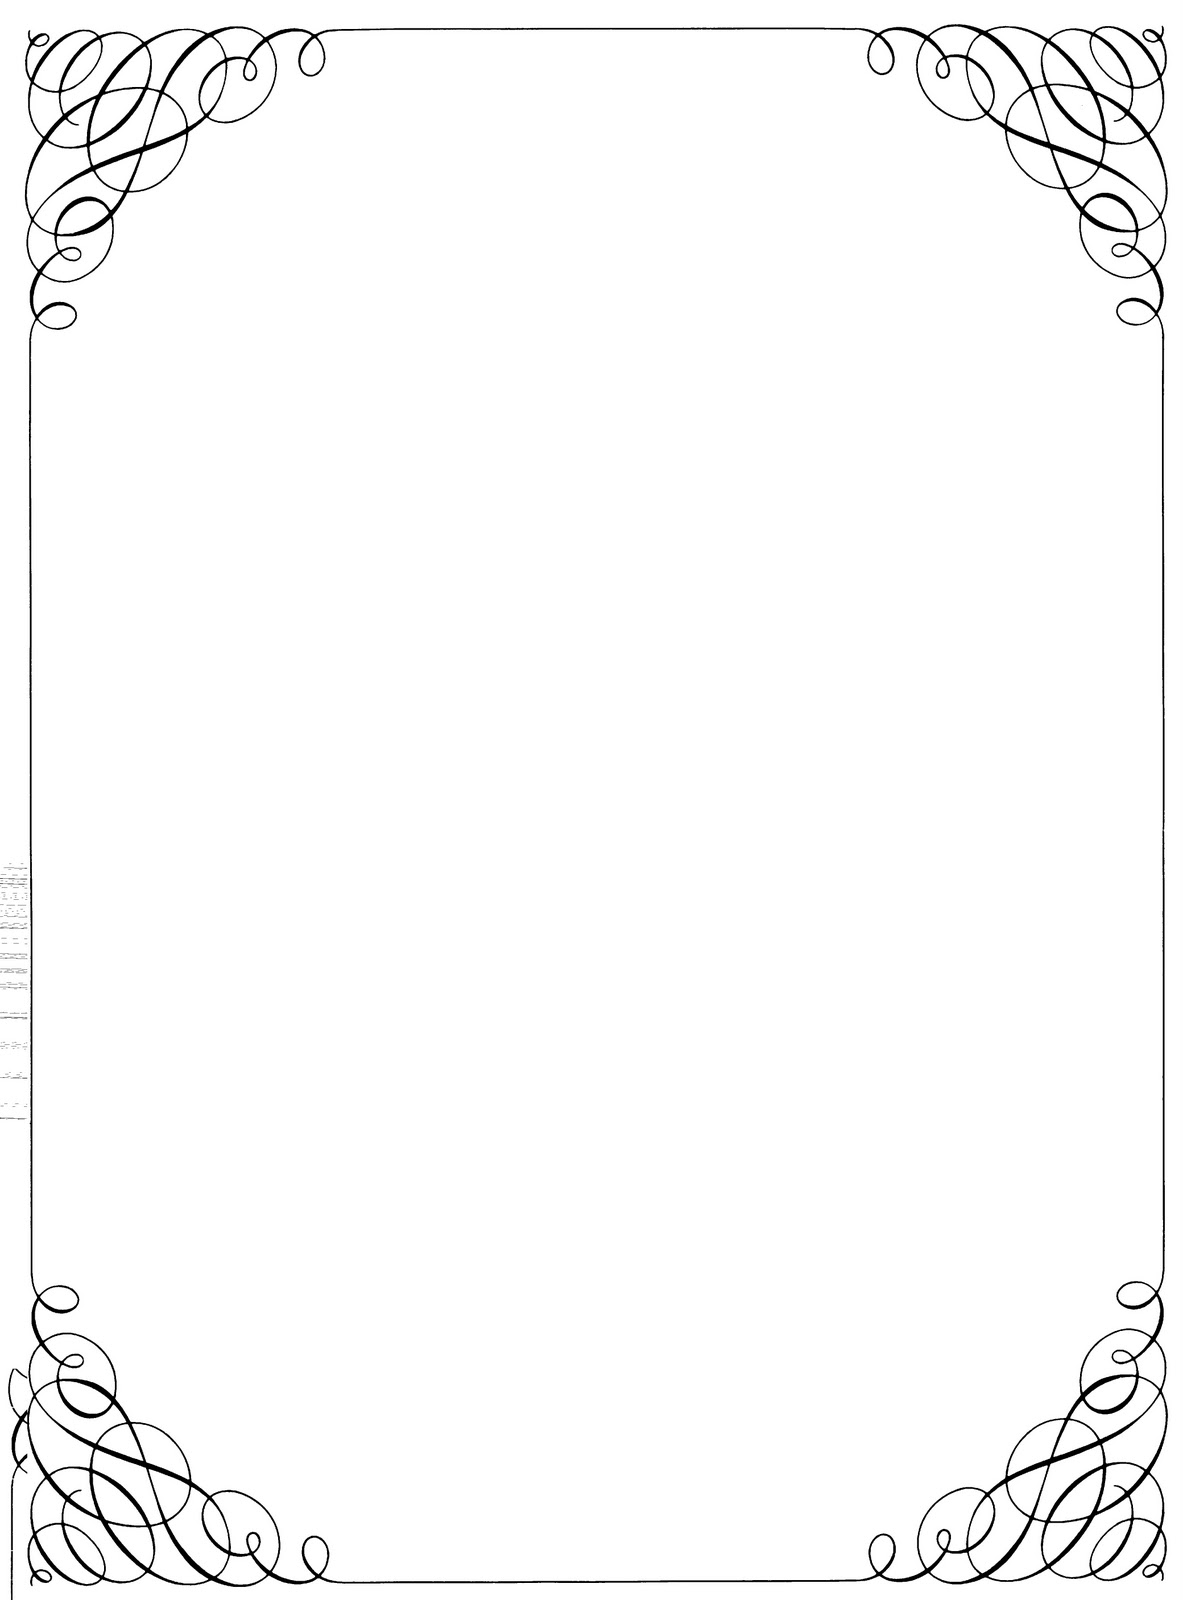 23+ Free Border Clipart - Preview : Page Border Templ  HDClipartAll For Word Border Templates Free Download